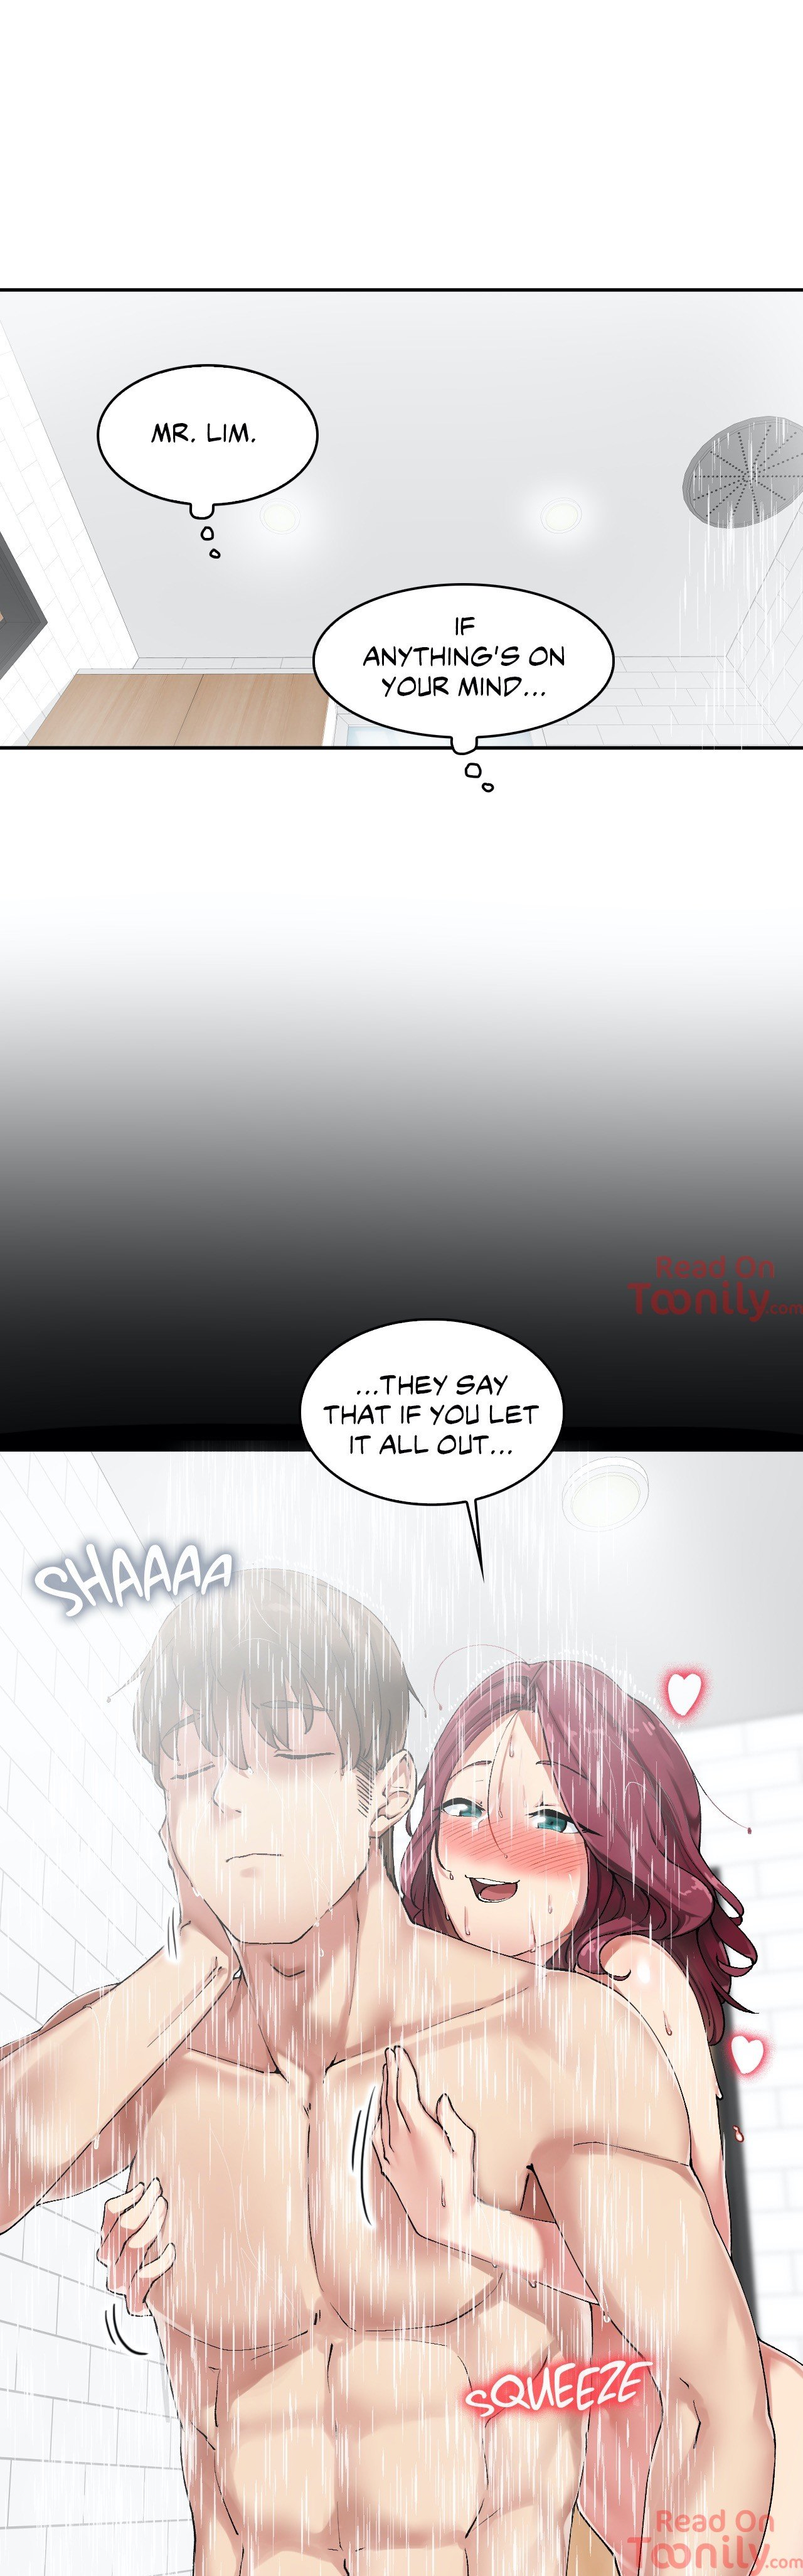 The Girl Hiding in the Wall Chapter 6 - Page 7